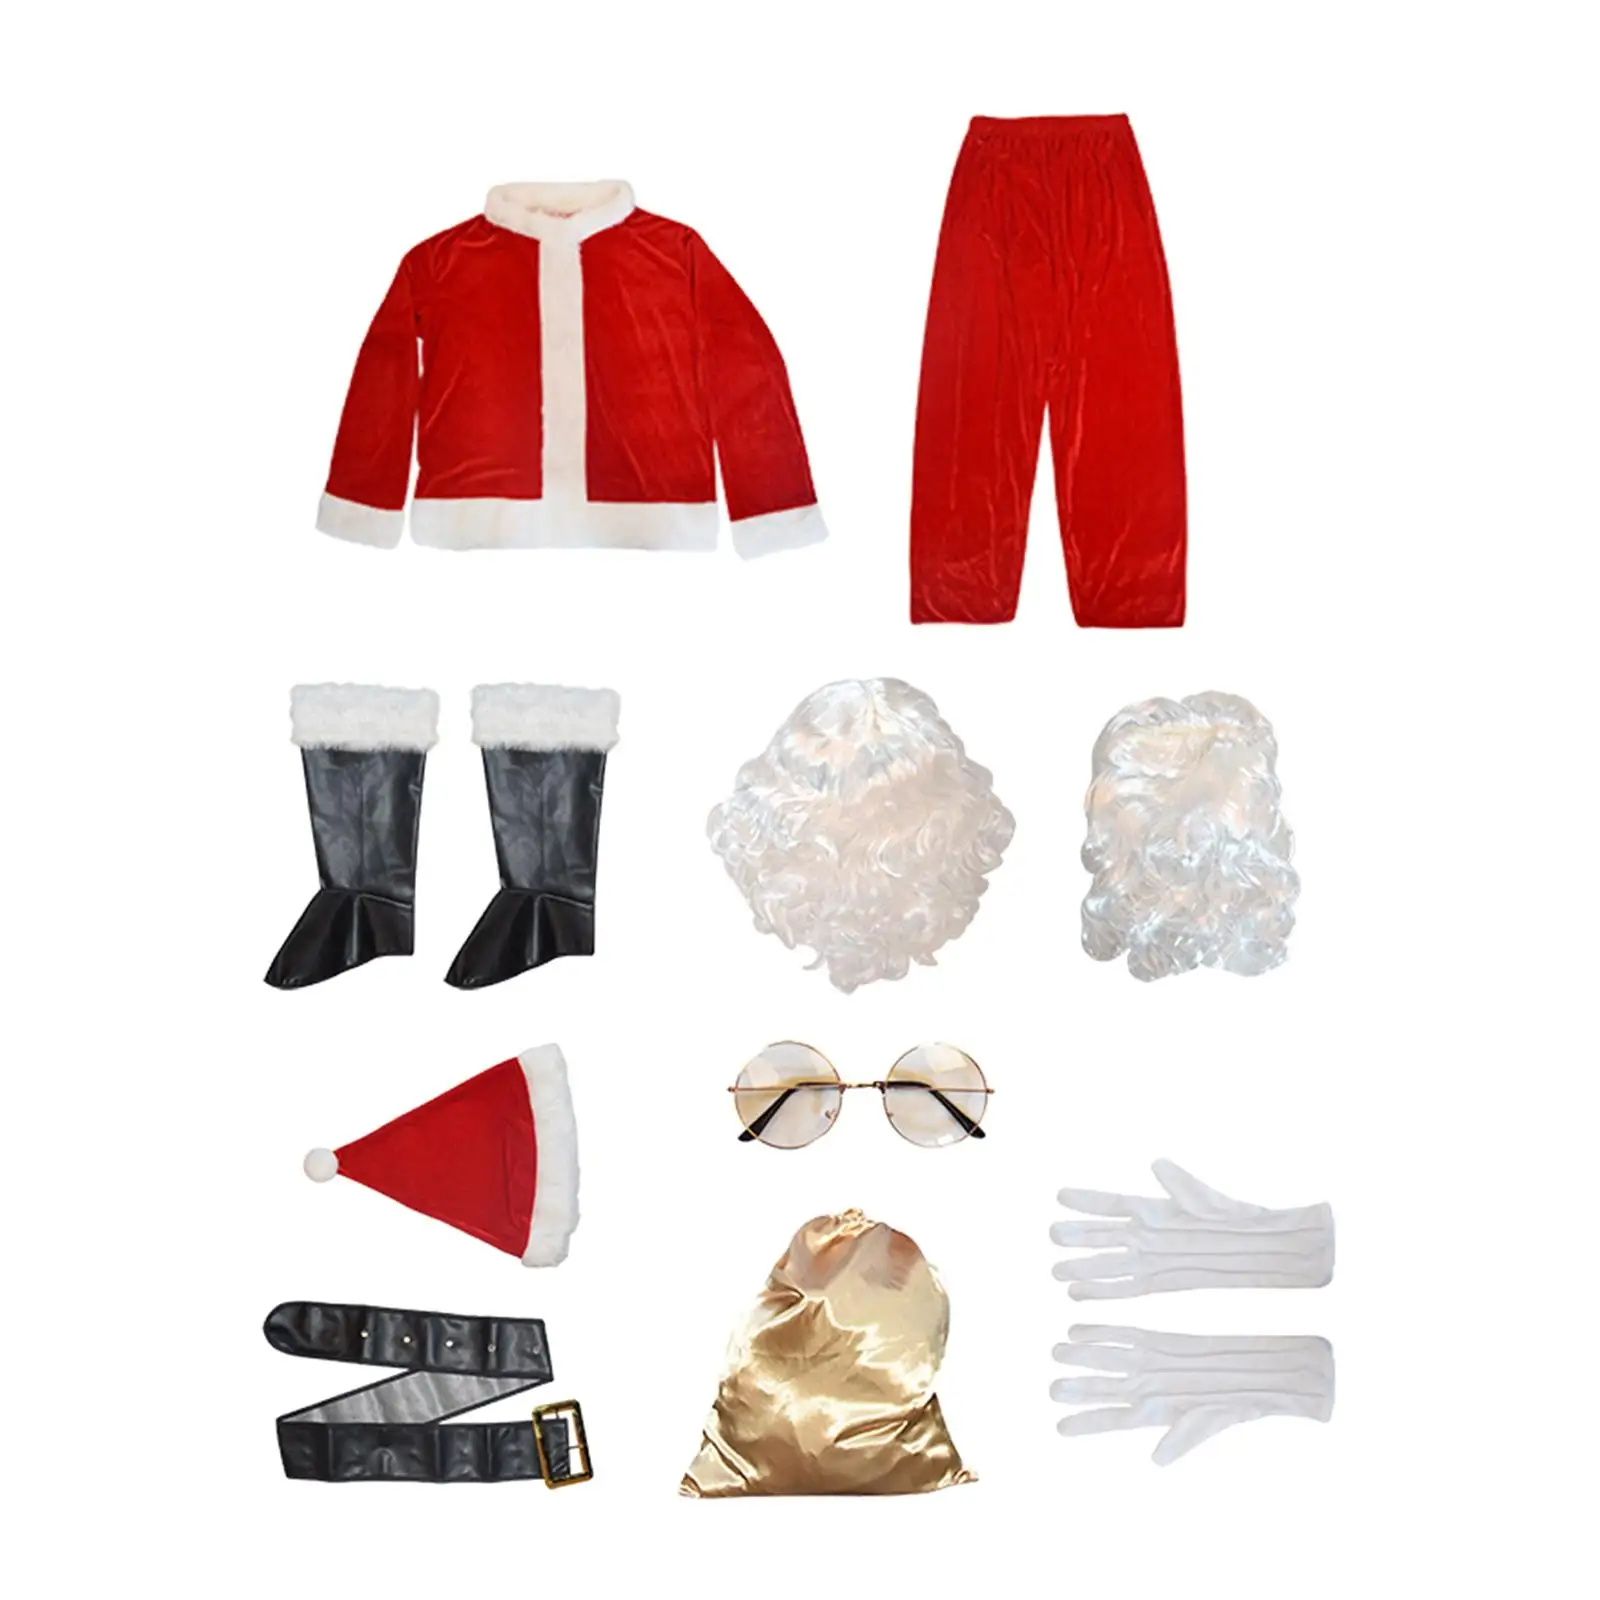 10Pcs Santa Costume for Men, Christmas Clause Outfit Wig Beard Velvet for Clothing Accessory, Holidays